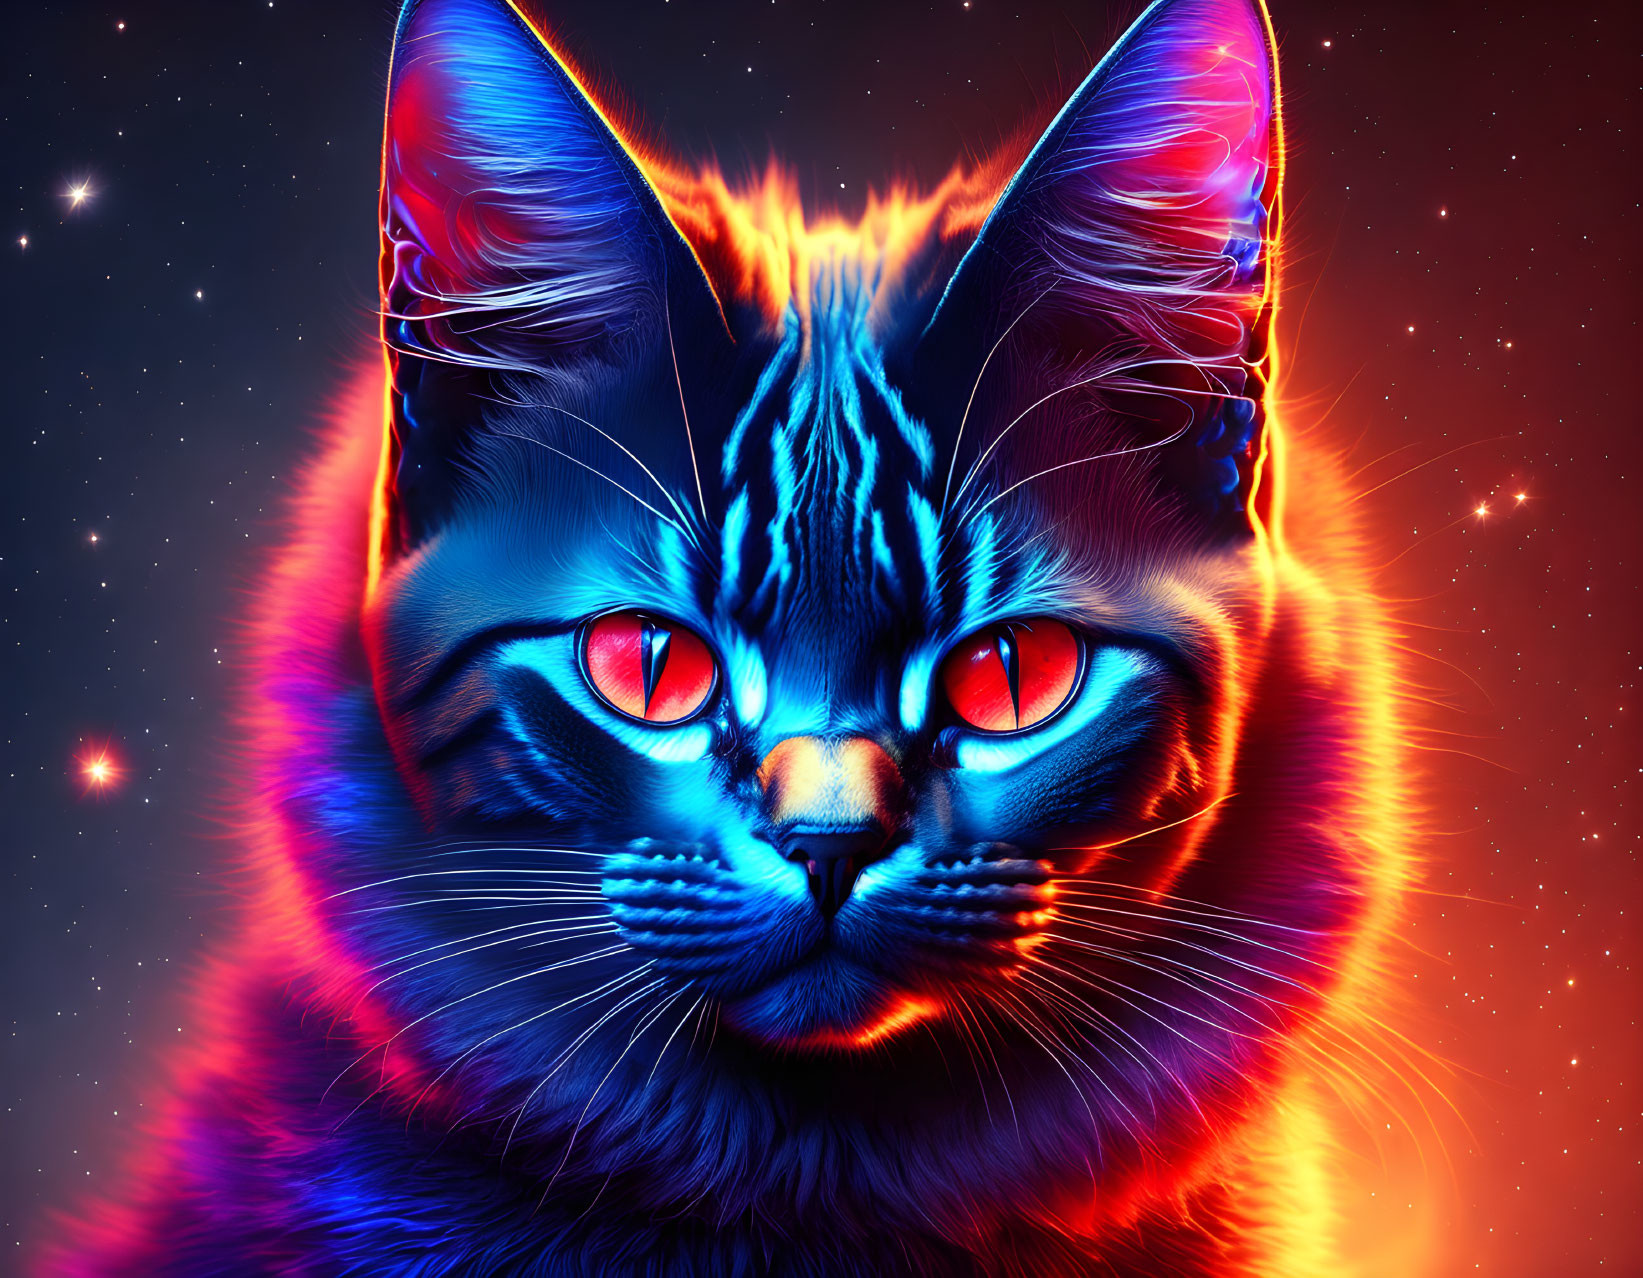 Colorful digital artwork: Cat with glowing fur and neon outlines on starry space background